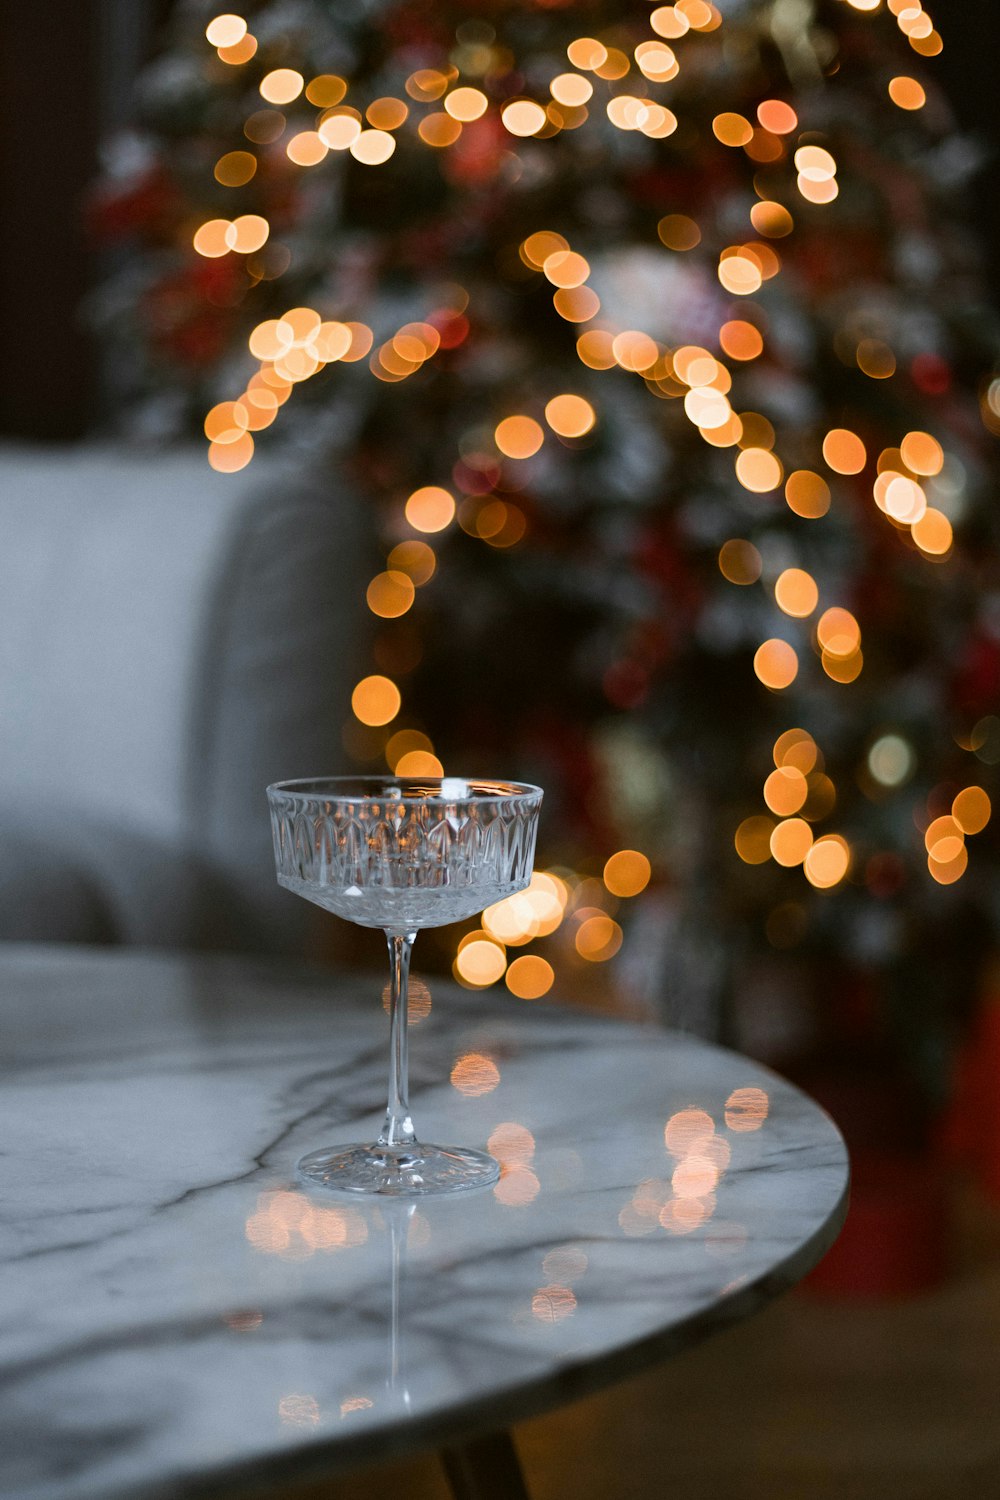 a glass of wine on a table with a christmas tree in the background